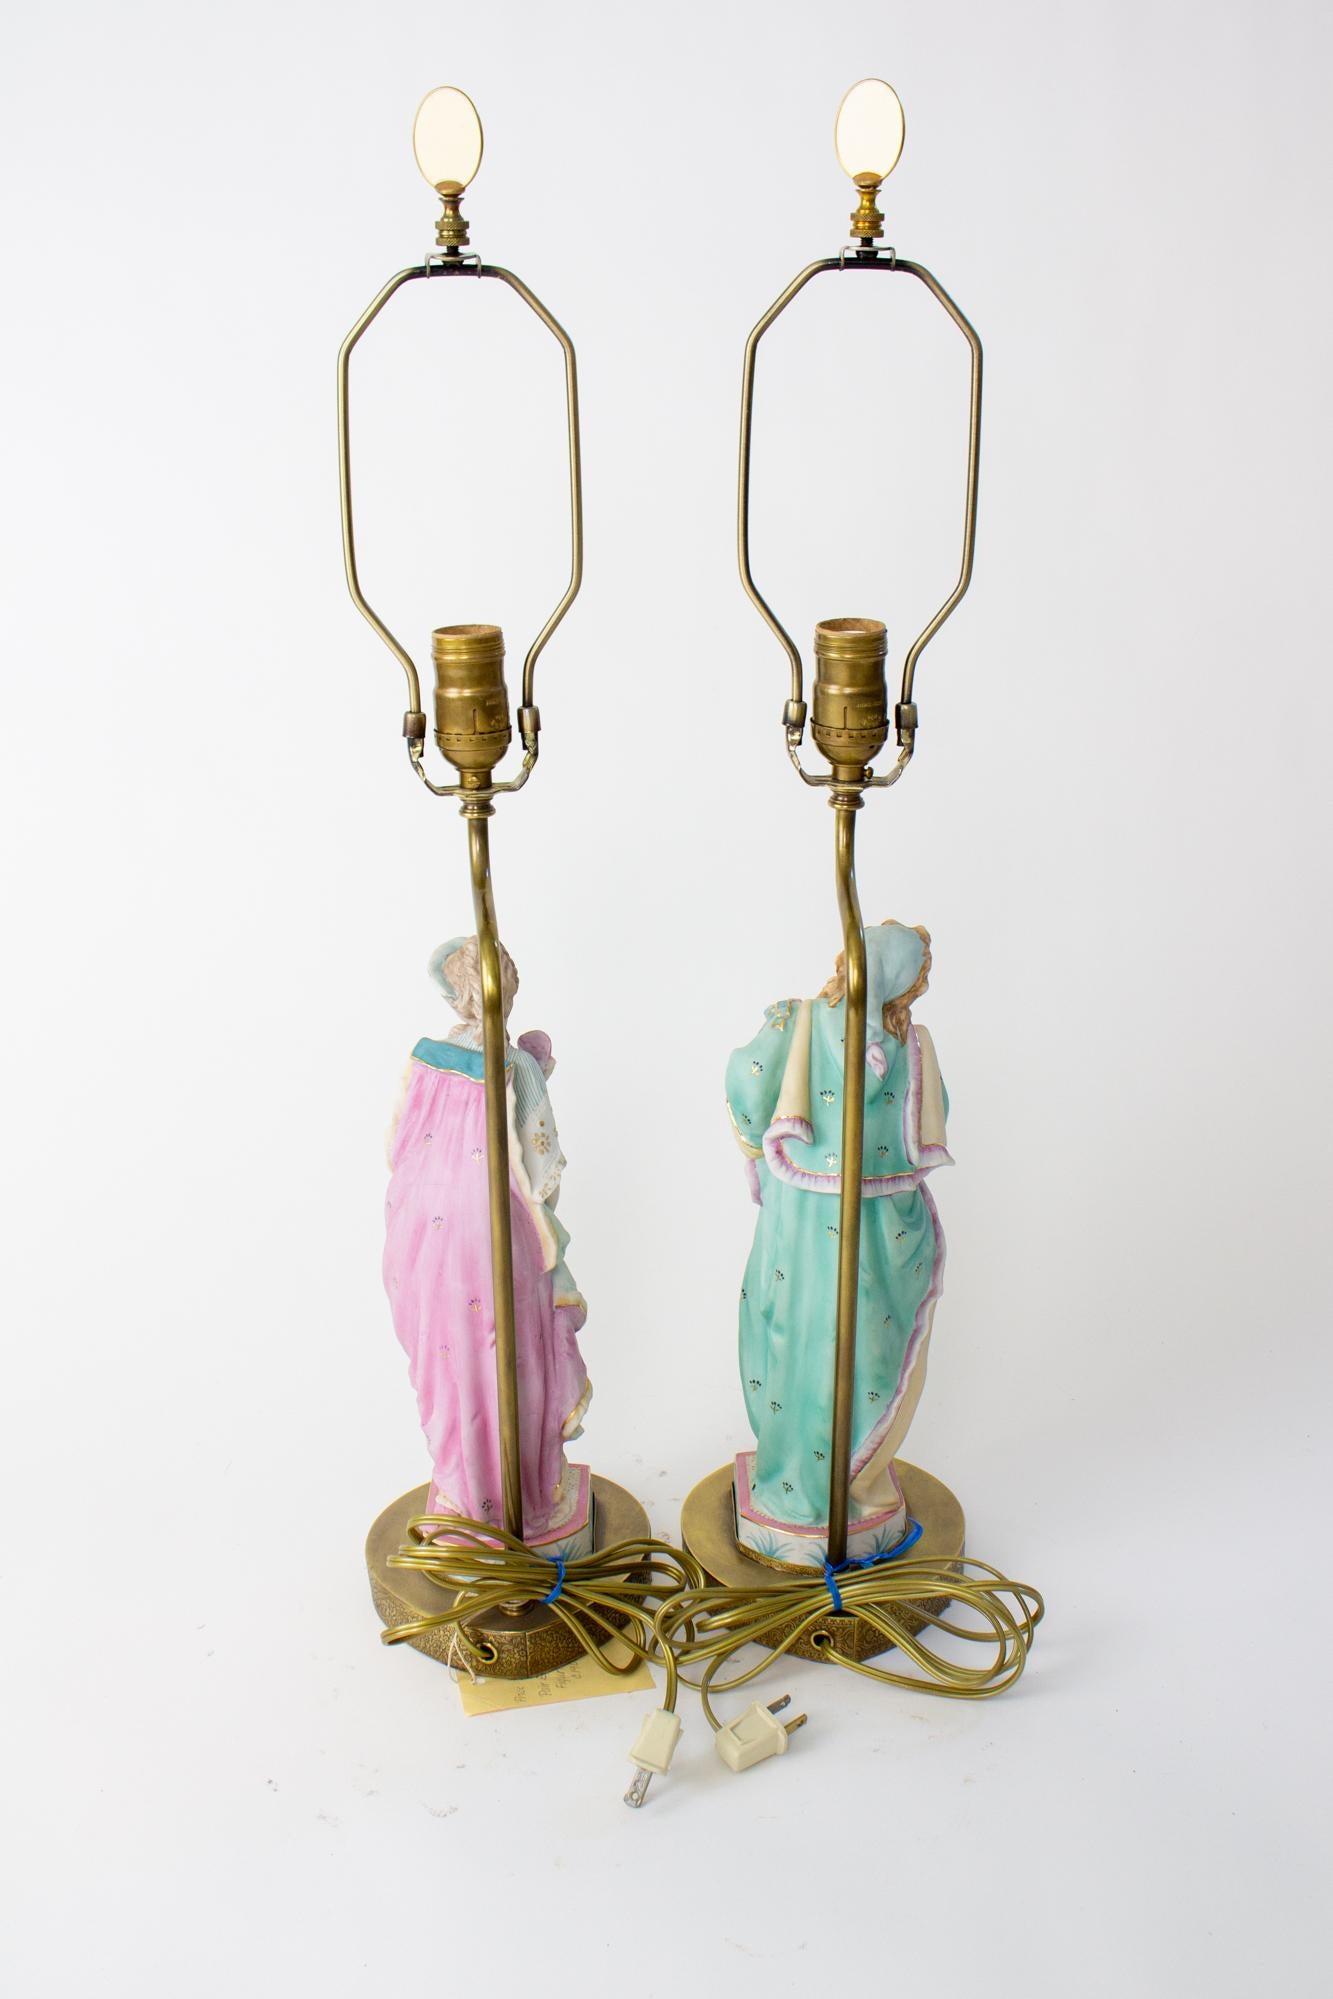 Mid 20th Century Masquerade Bisque Figurine Lamps - a Pair In Excellent Condition For Sale In Canton, MA